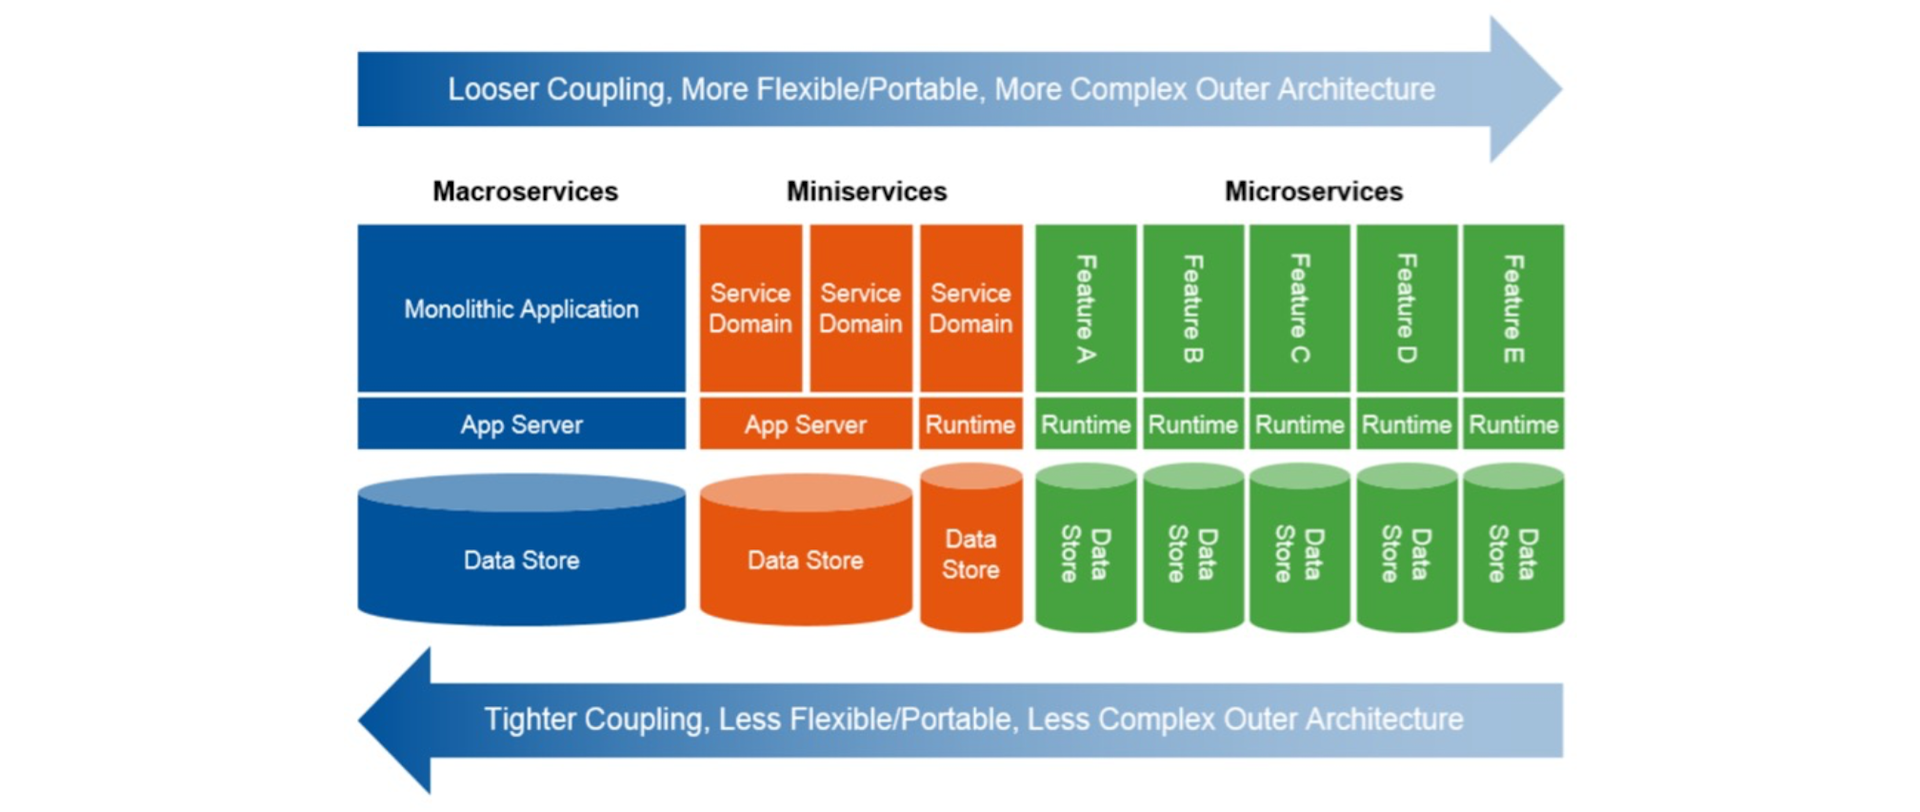 Microservices architecture image